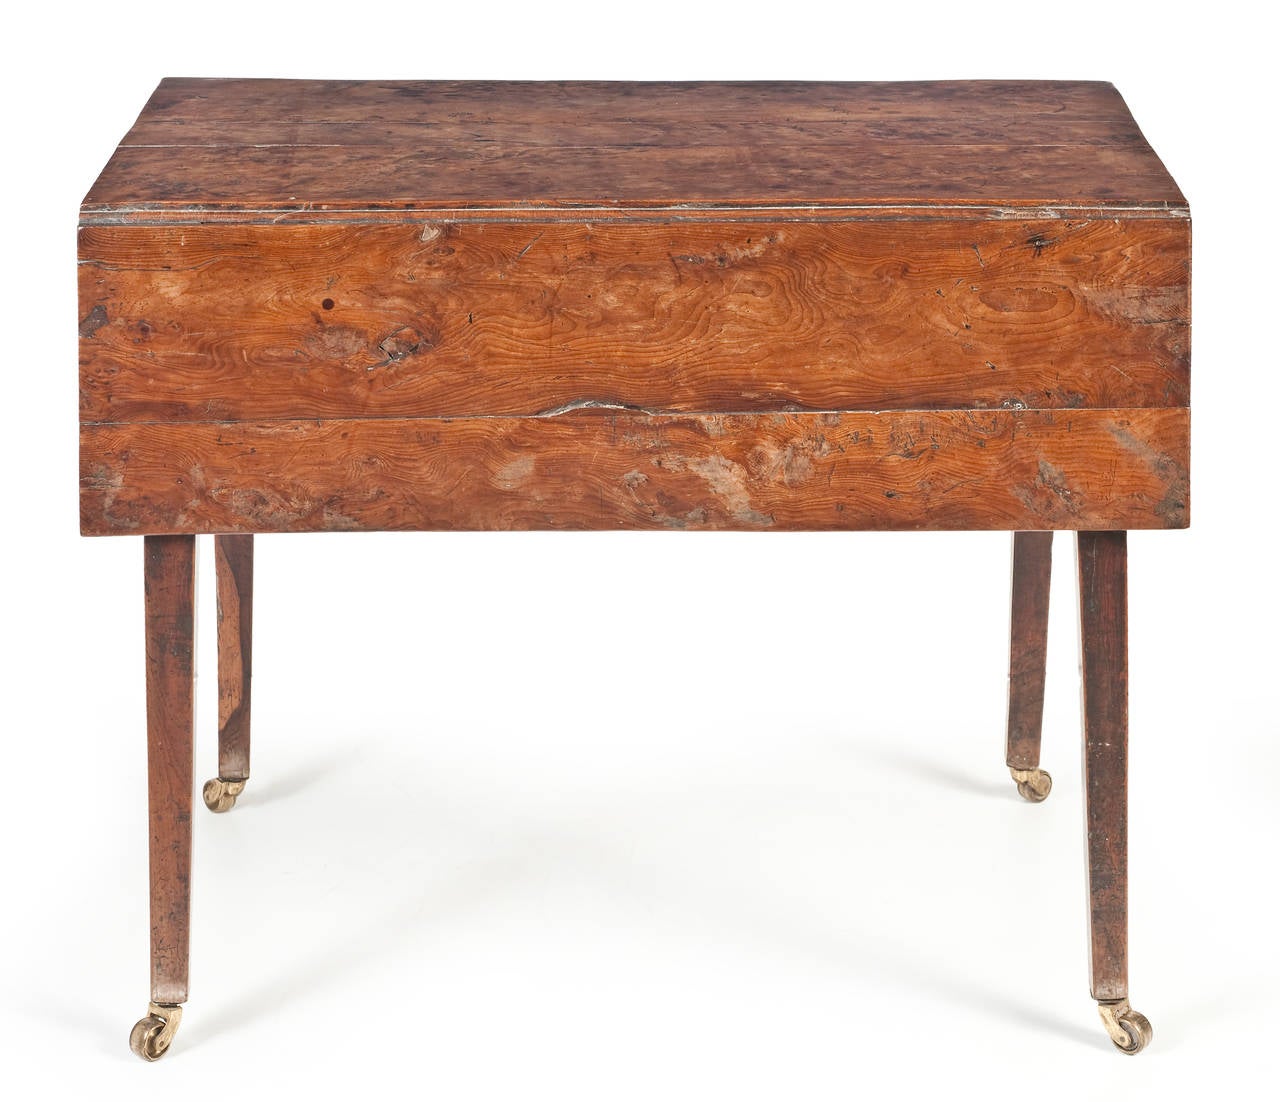 English George III Solid Yew Wood Pembroke Table For Sale